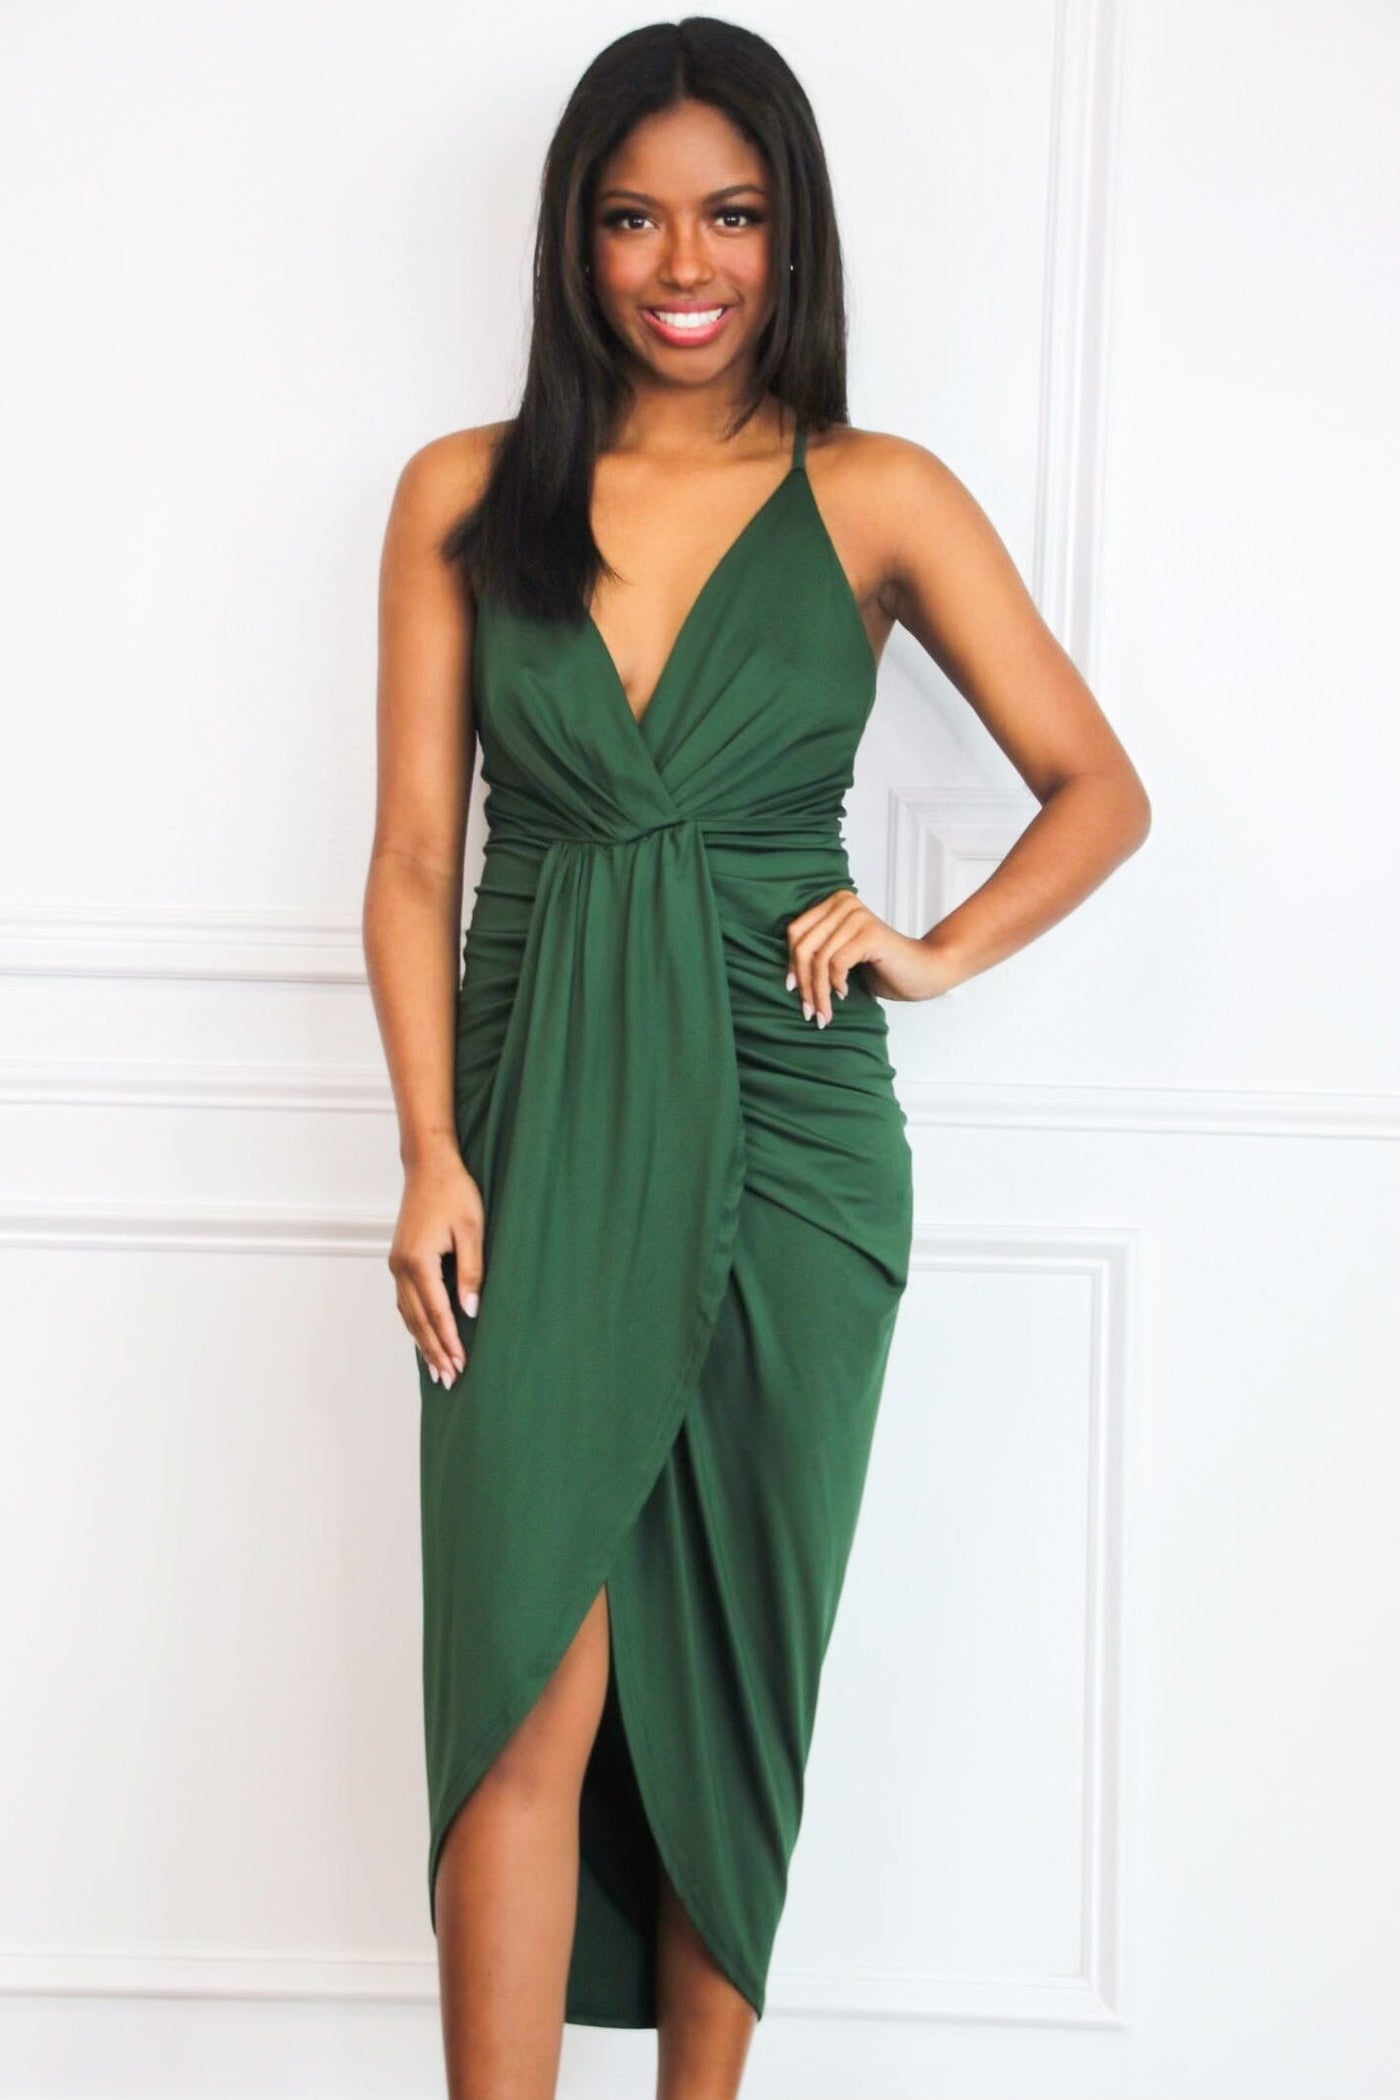 Can't Quit You Midi Dress: Hunter Green - Bella and Bloom Boutique